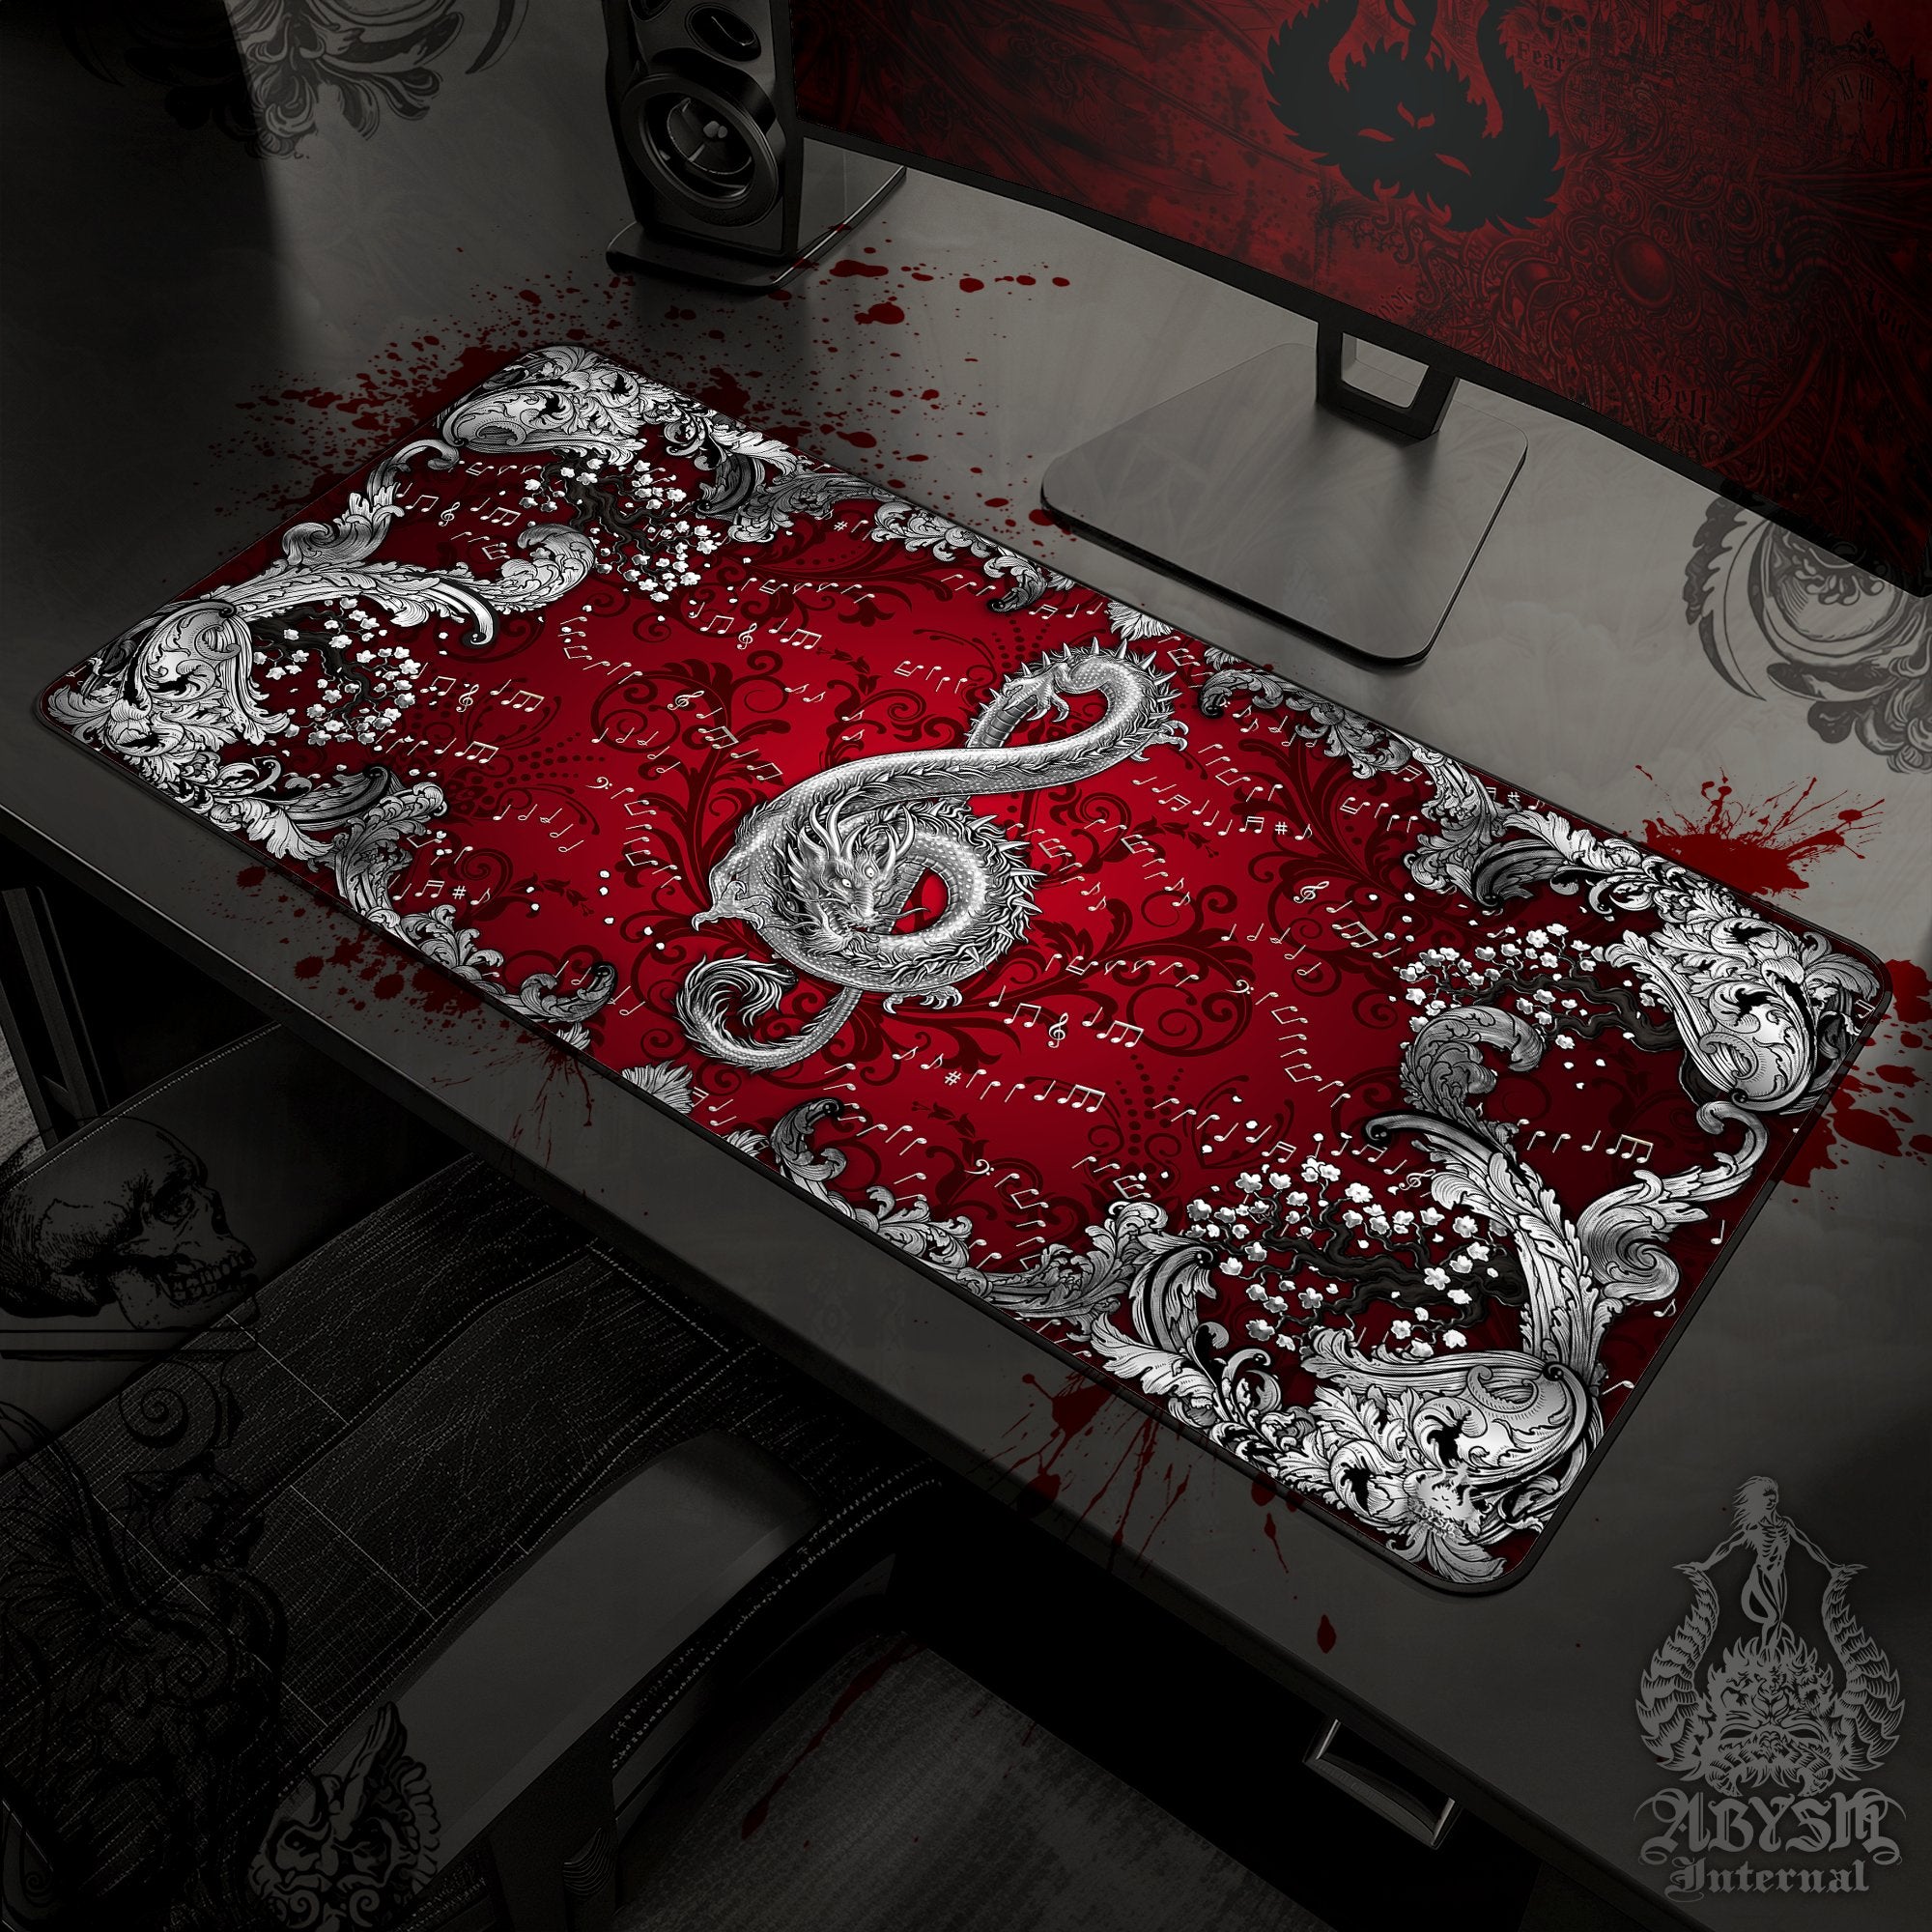 Silver Music Mouse Pad, Dragon Gaming Desk Mat, Asian Workpad, Ornamented Table Protector Cover, Treble Clef Art Print - 2 Colors - Abysm Internal